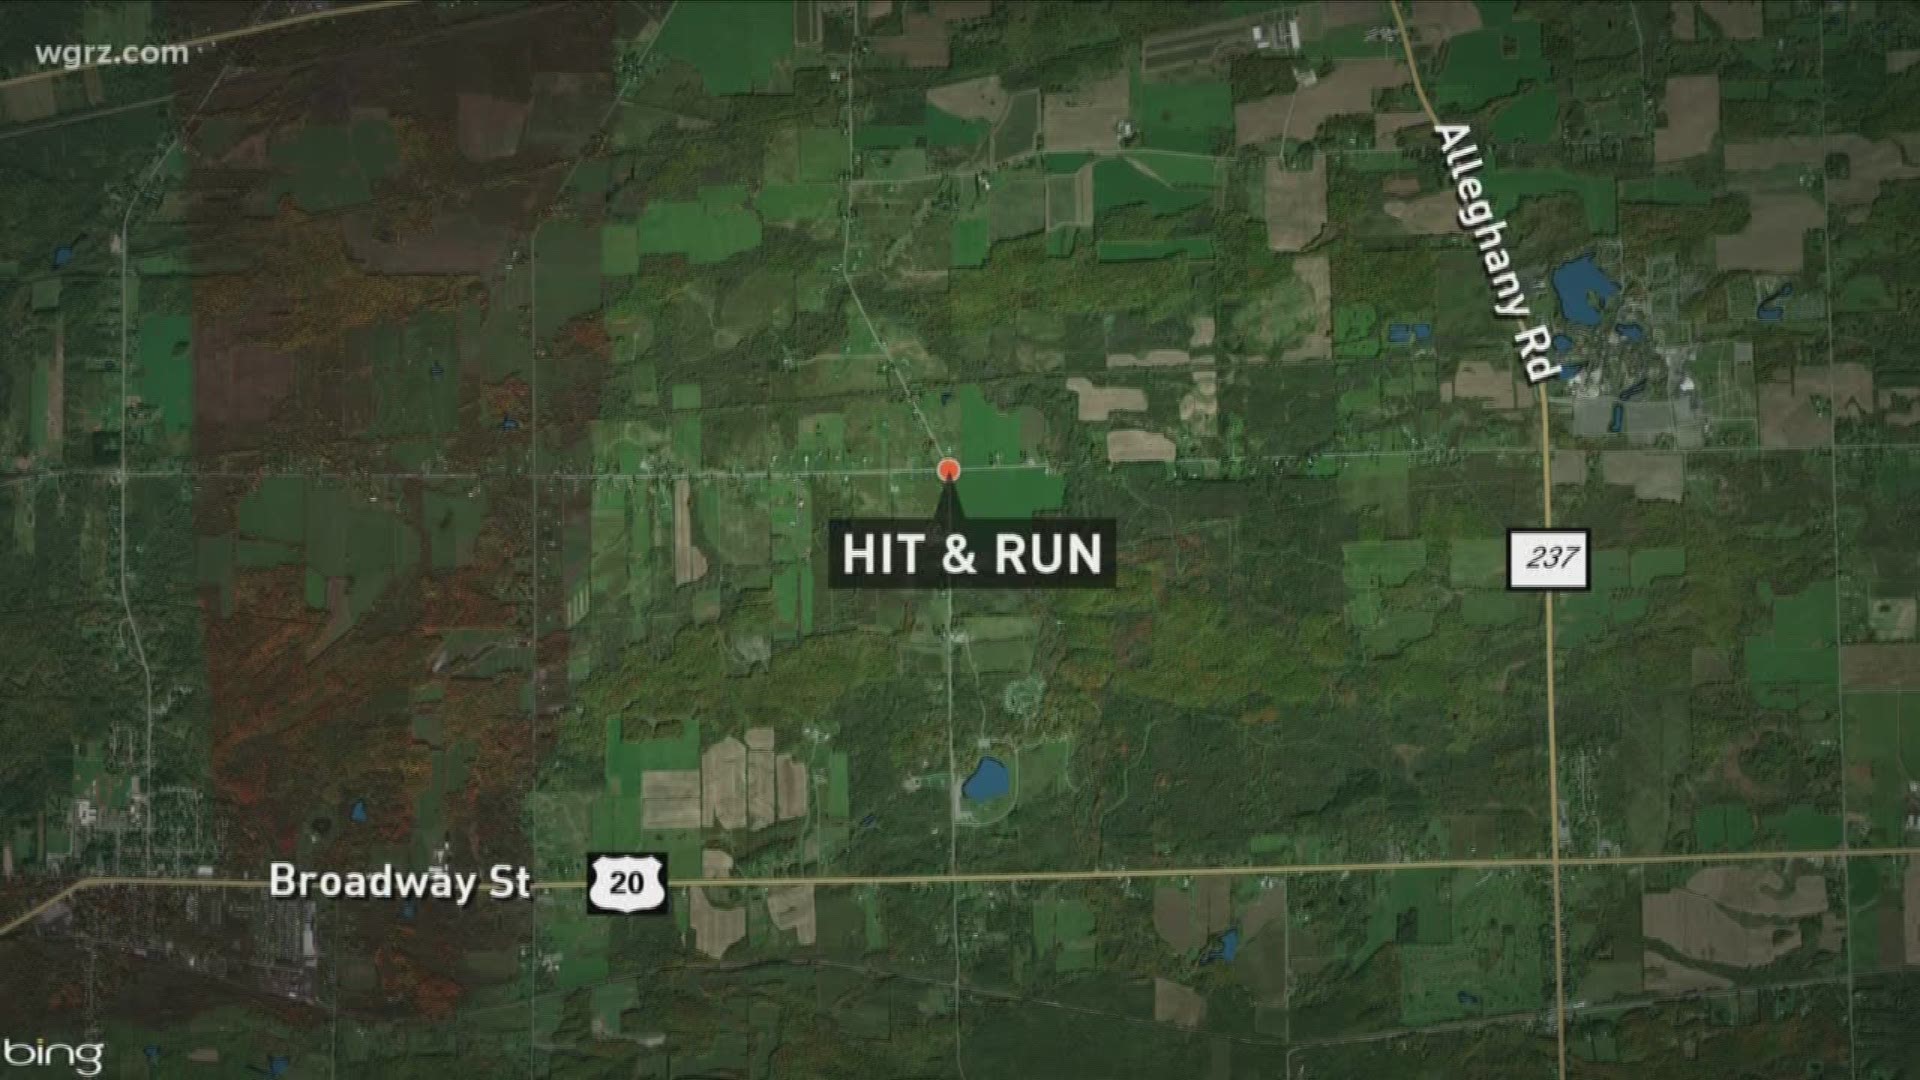 Arrest made in hit and run accident